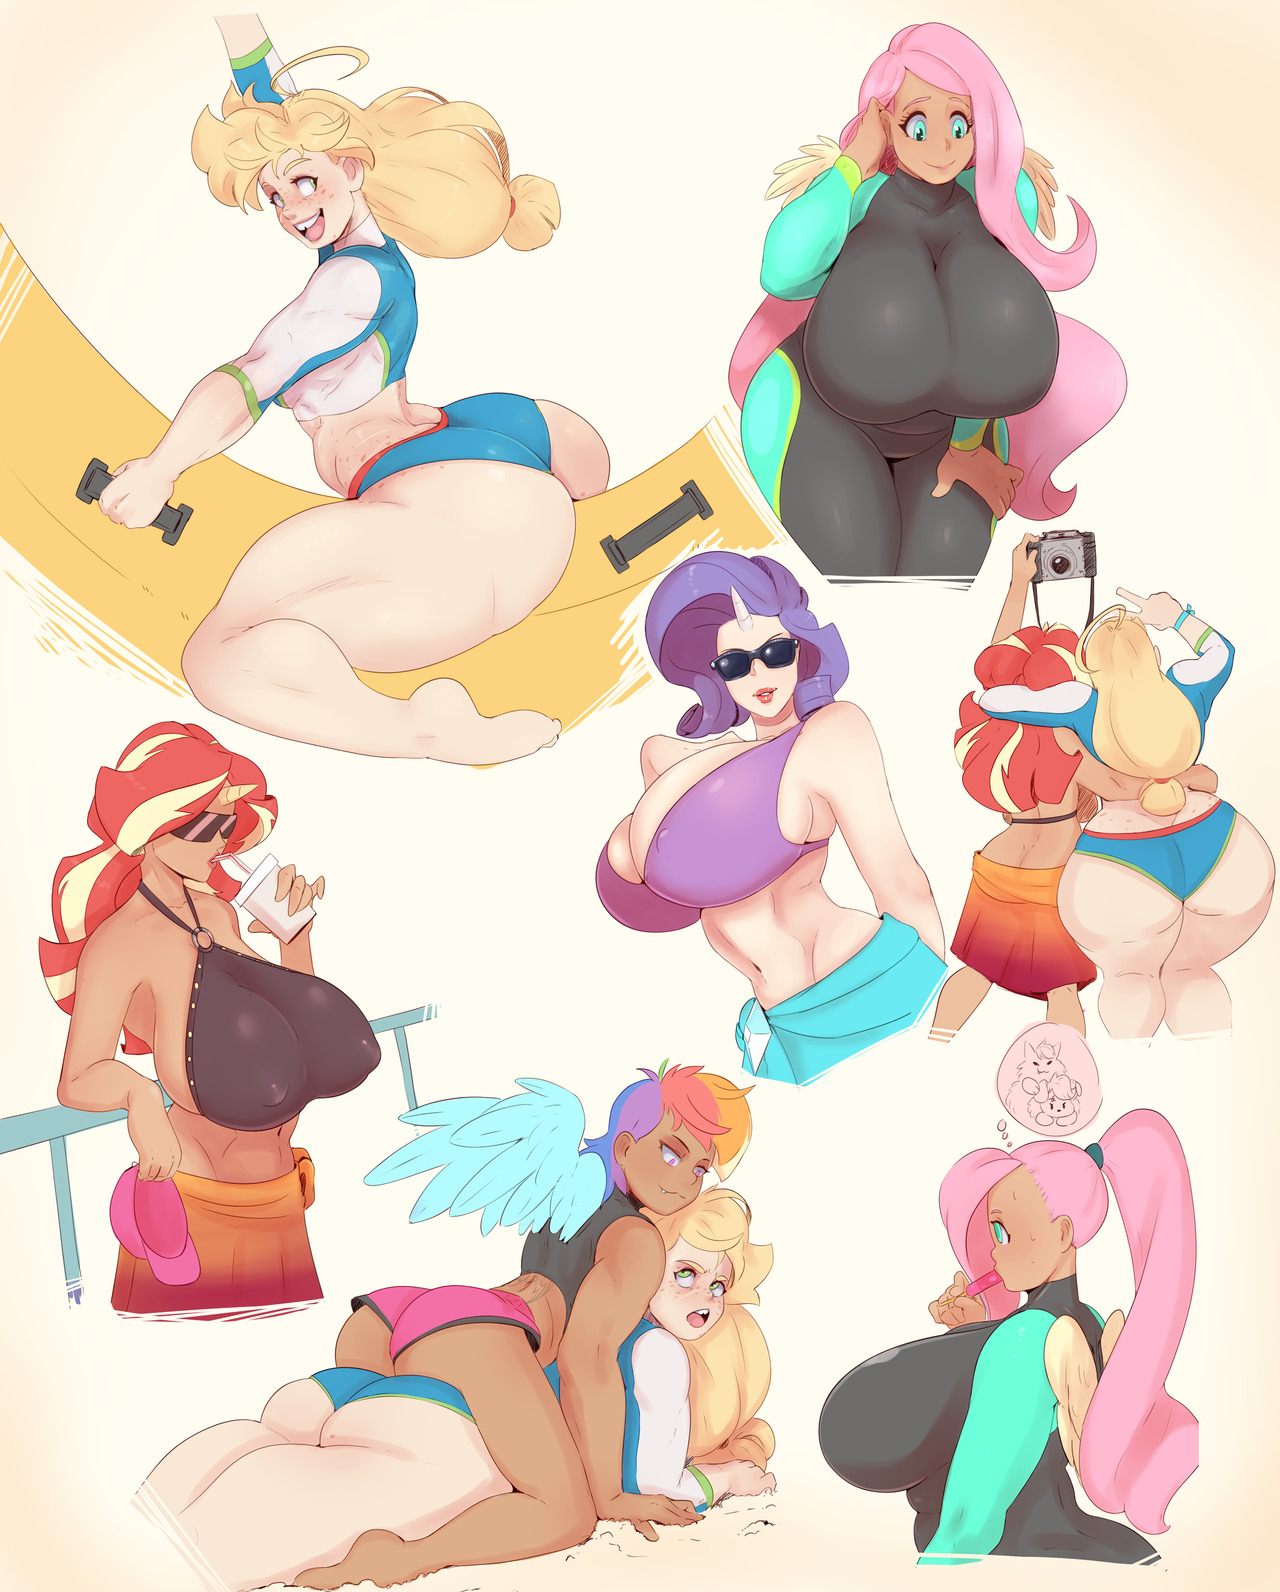 sunnysundown: some beach doodles!  if ya like what i draw you can now support me